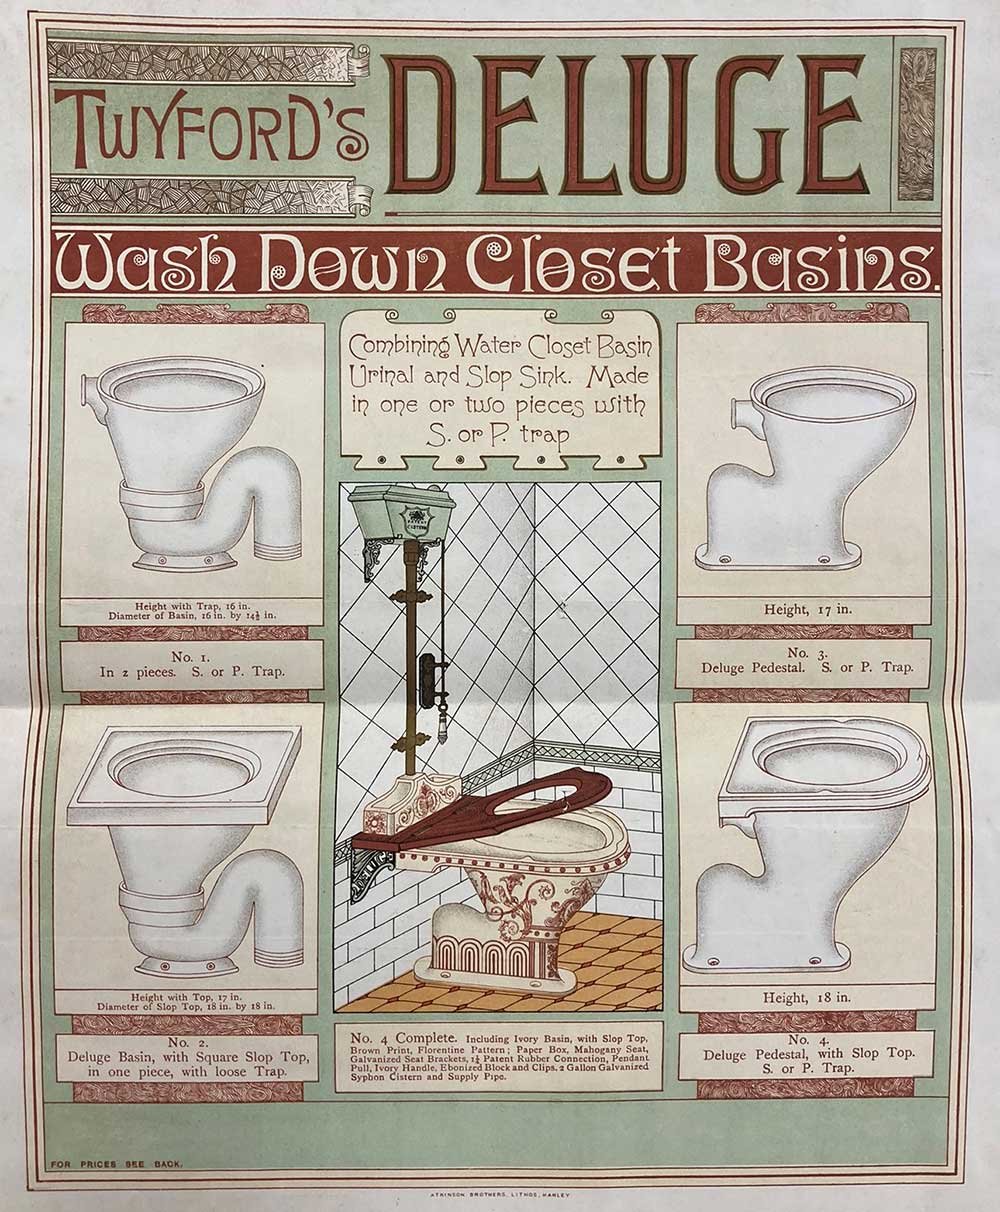 A richly decorated poster featuring diagrams of toilet bowls and an ornate toilet in the centre